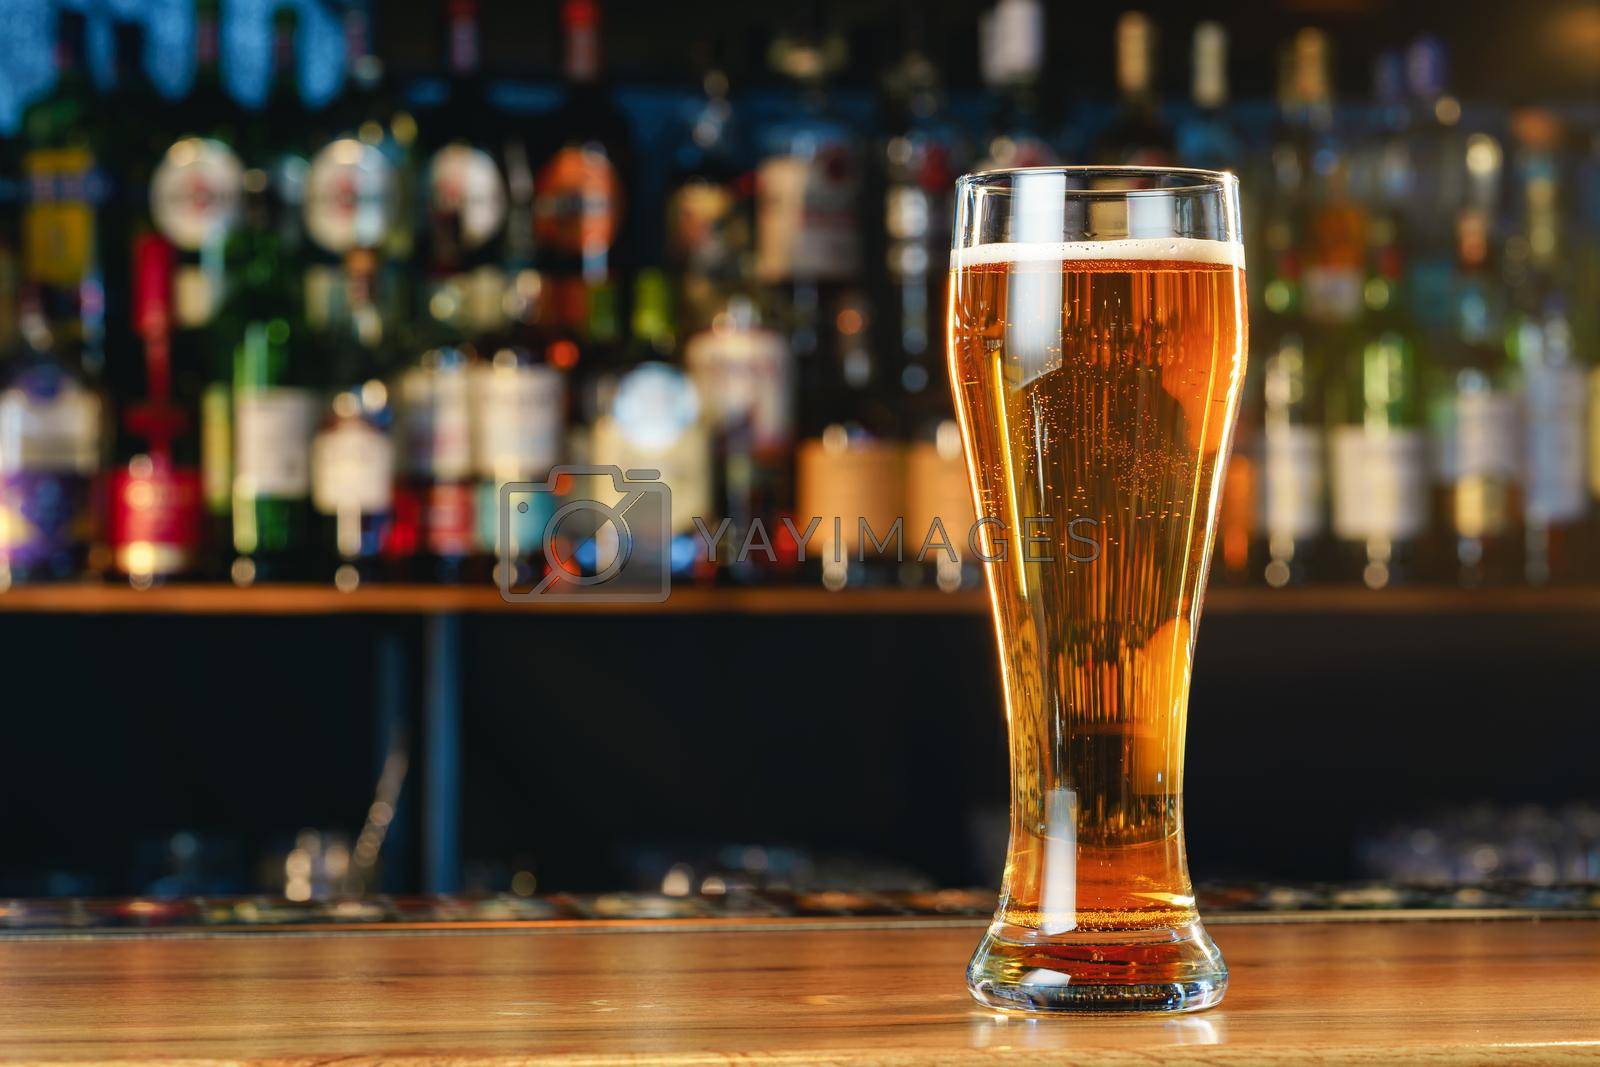 Royalty free image of Fresh cold beer in glass on bar background by Fabrikasimf